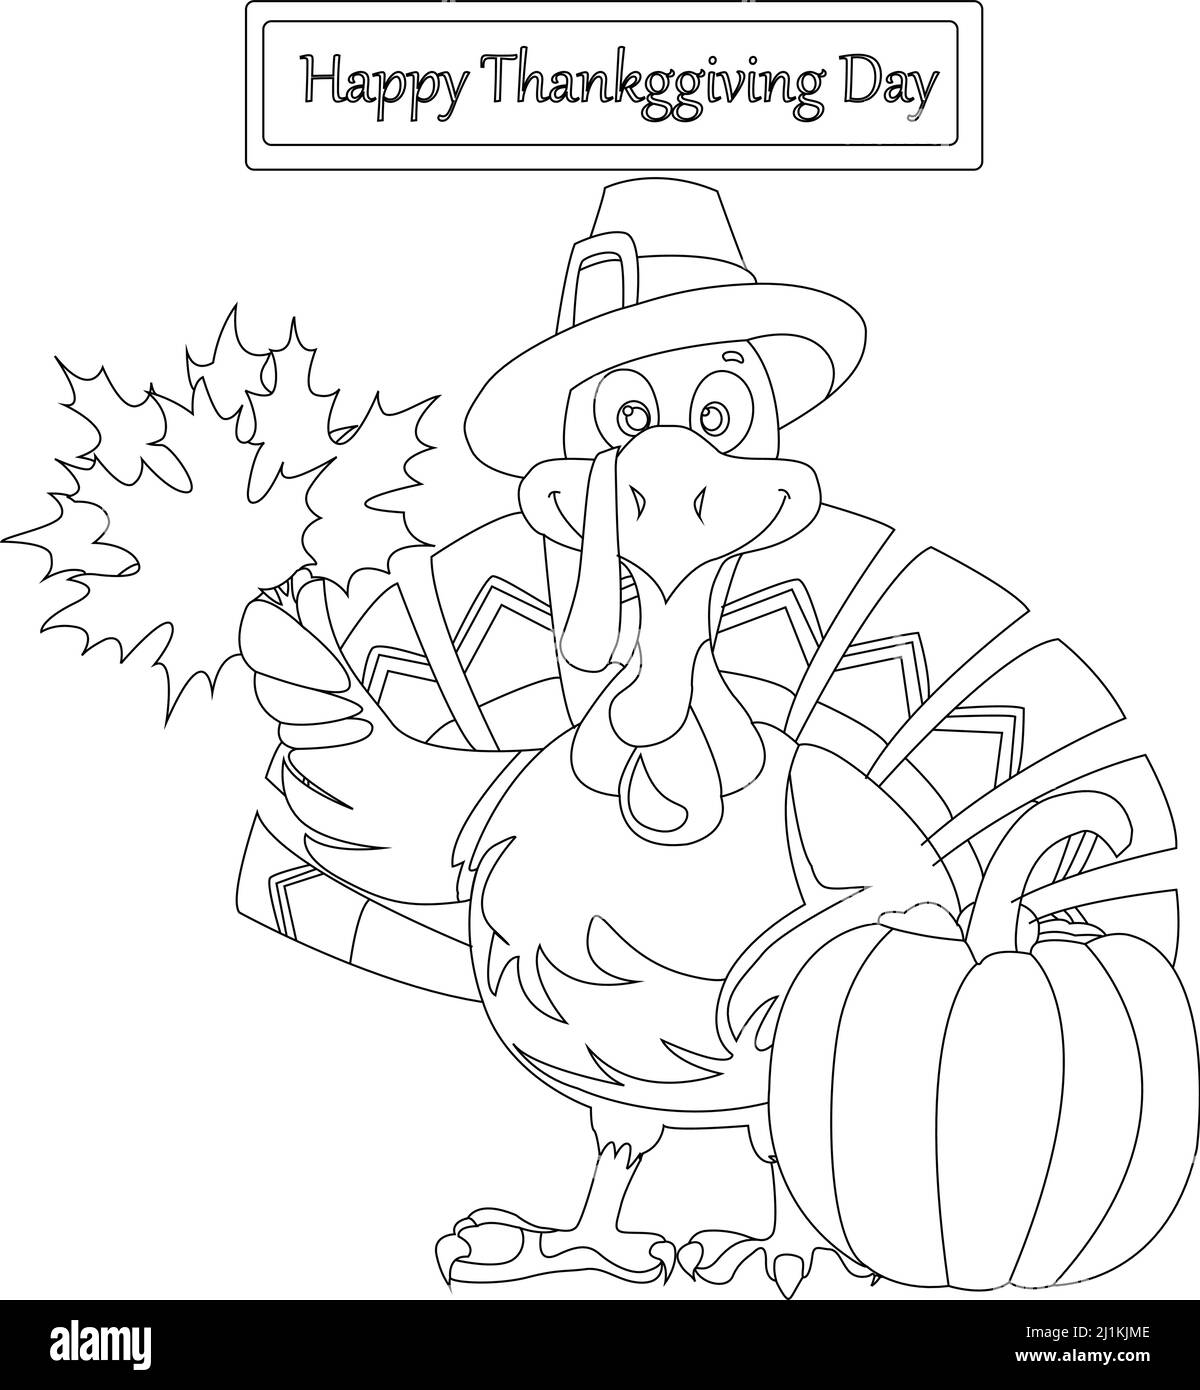 Thanks Giving Coloring Page For kids and aduls Stock Vector